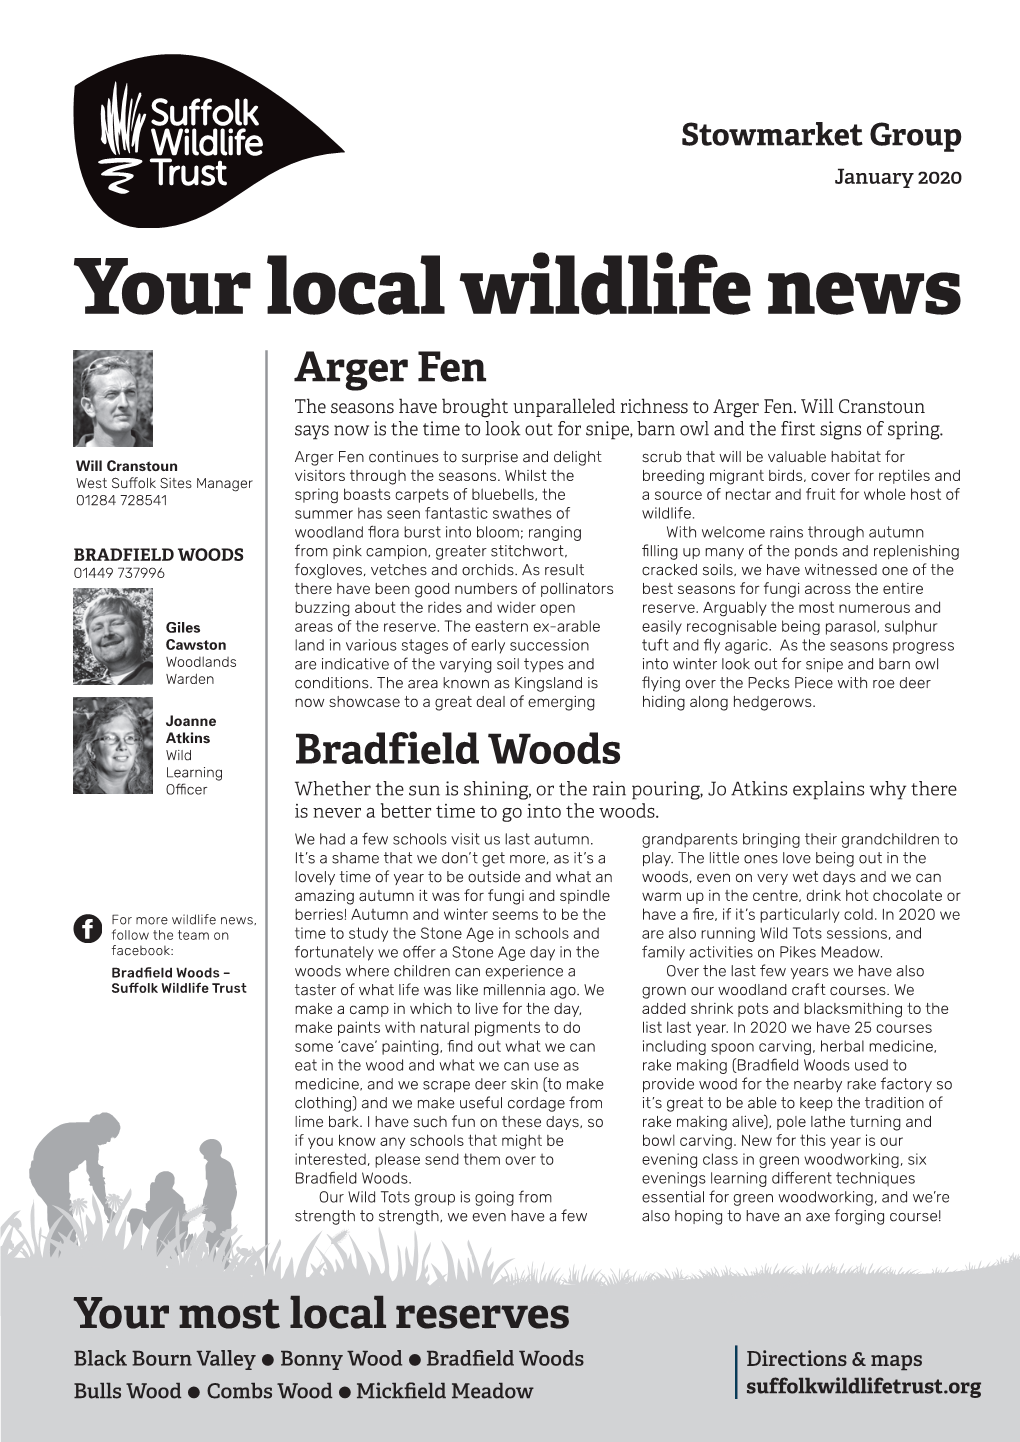 Your Local Wildlife News Arger Fen the Seasons Have Brought Unparalleled Richness to Arger Fen